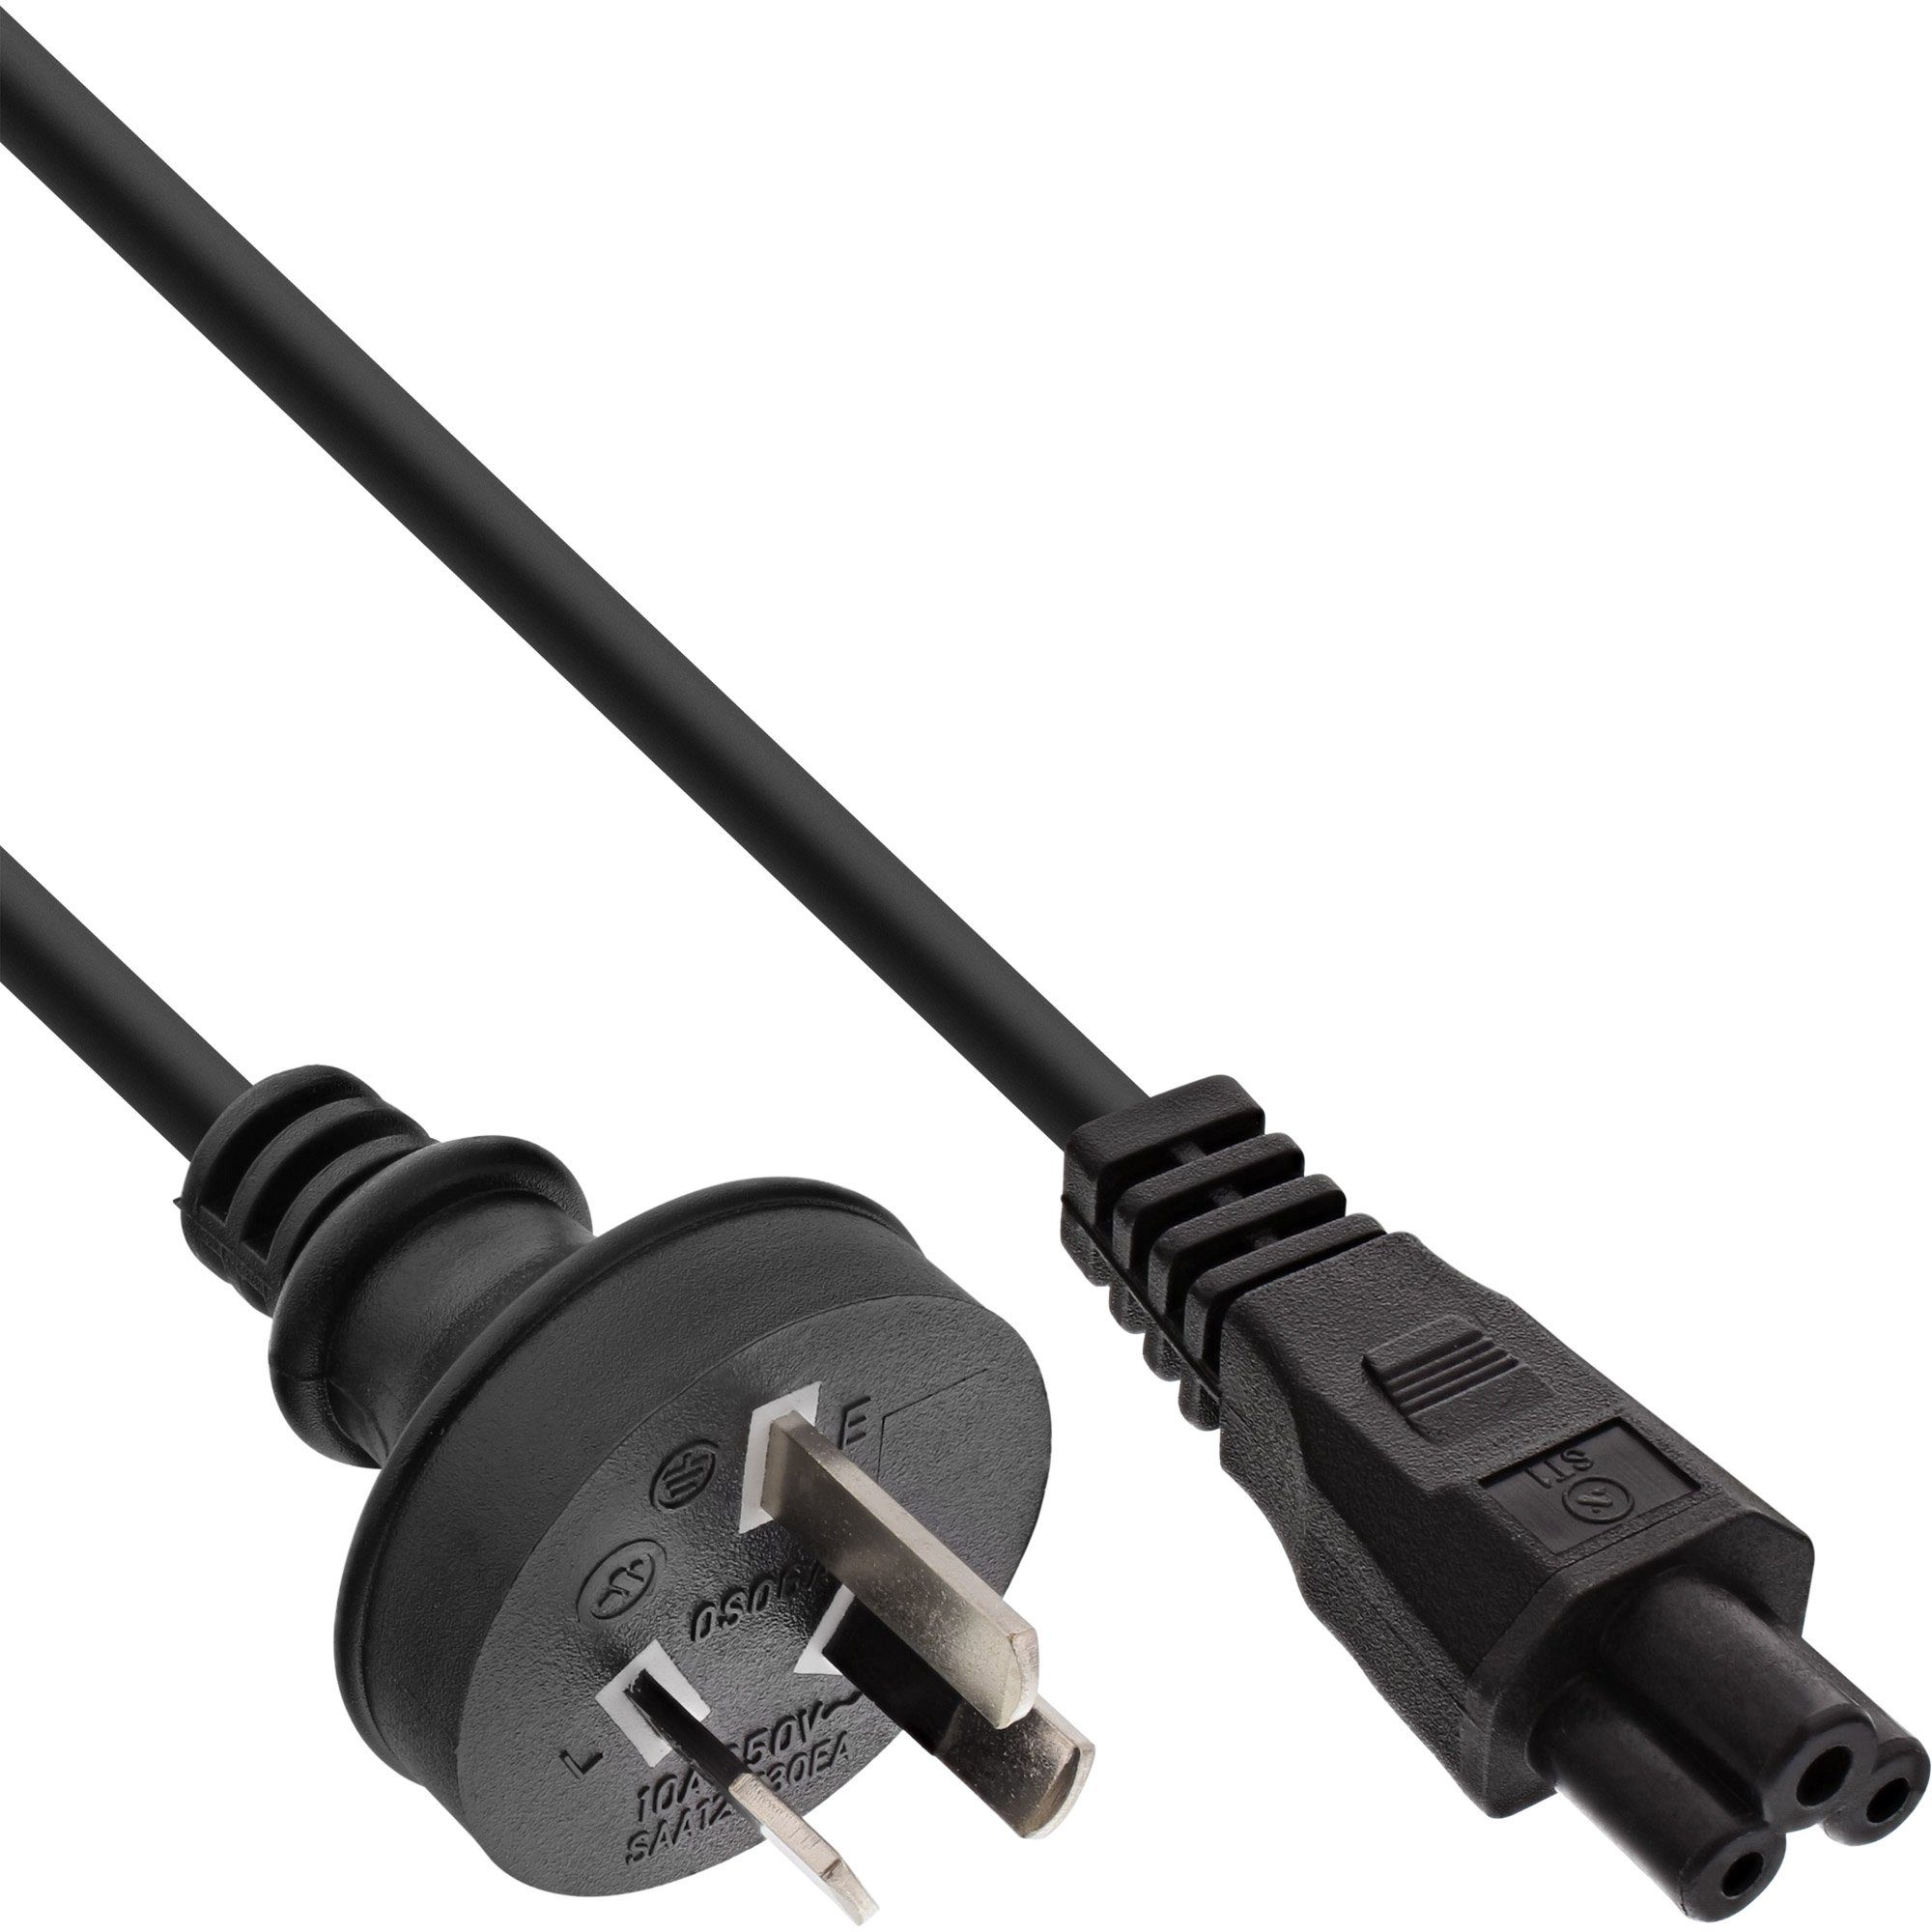 ELECTRONIC Stromkabel for 2m Notebook, INTOS black, Power InLine® Cable Australia, AG